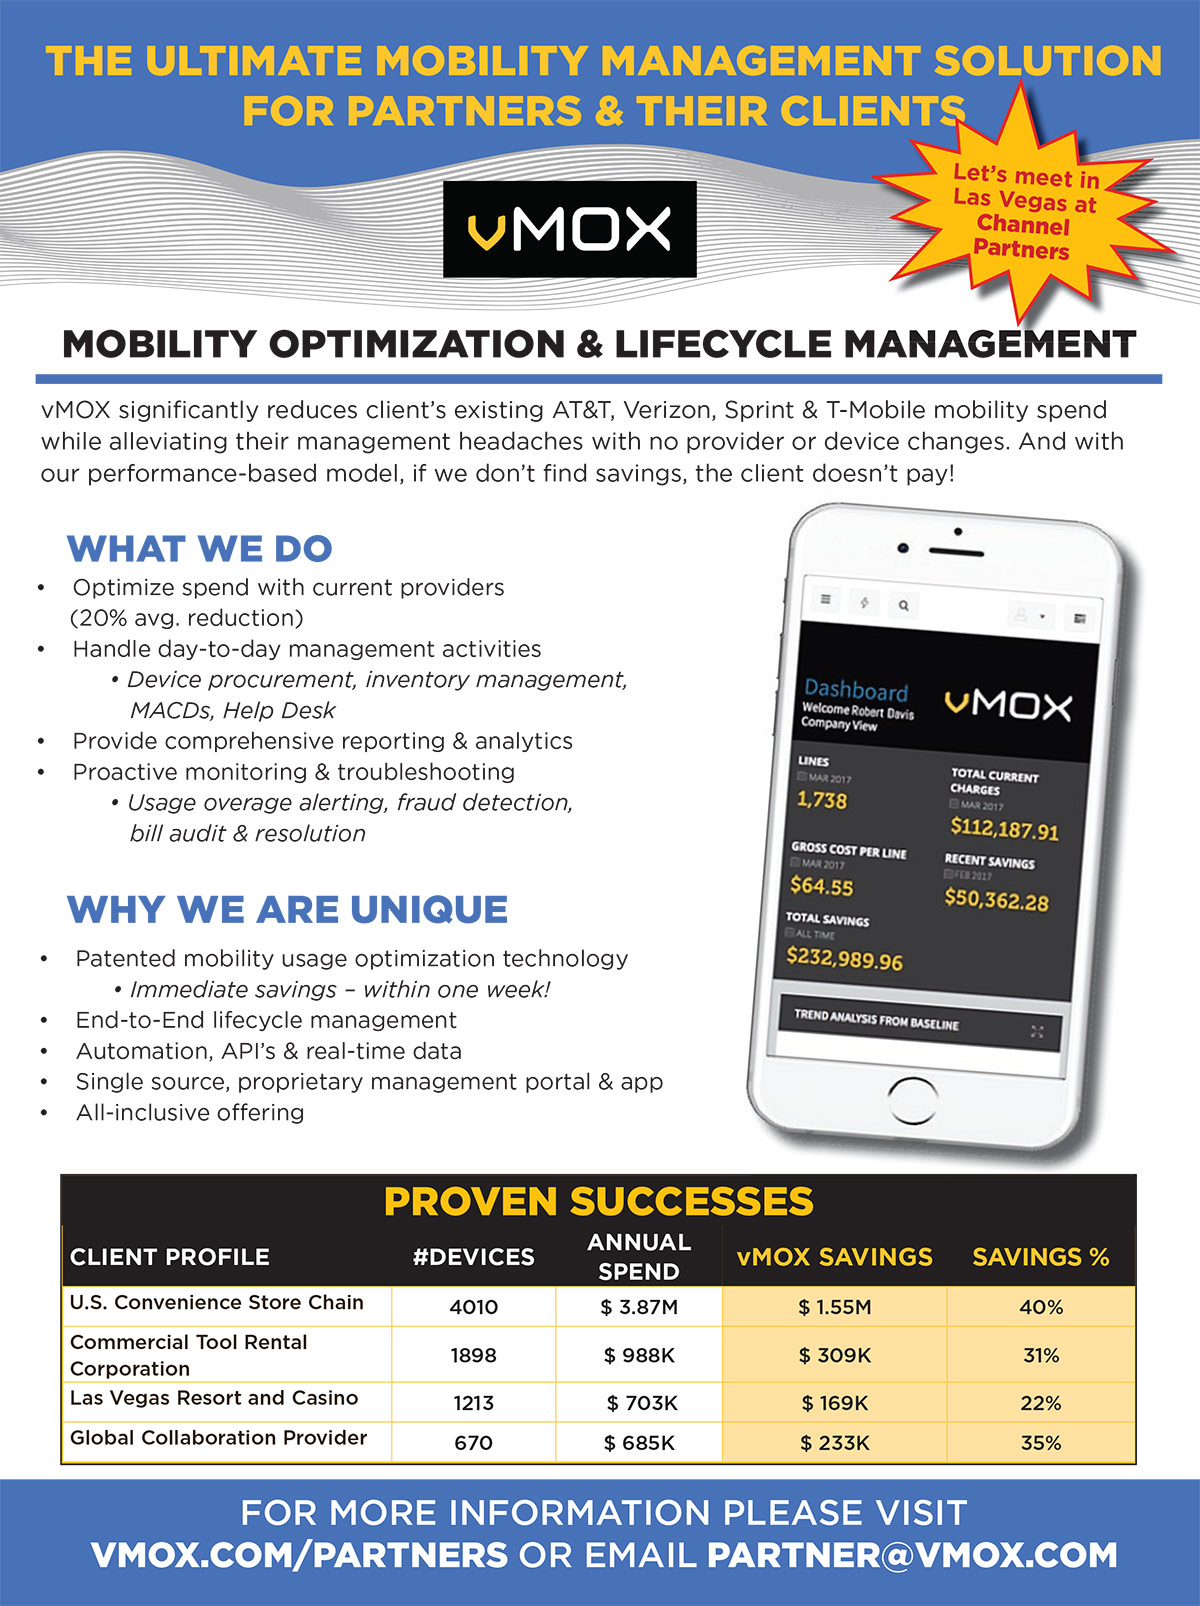 COME SEE VMOX AT CHANNEL PARTNERS